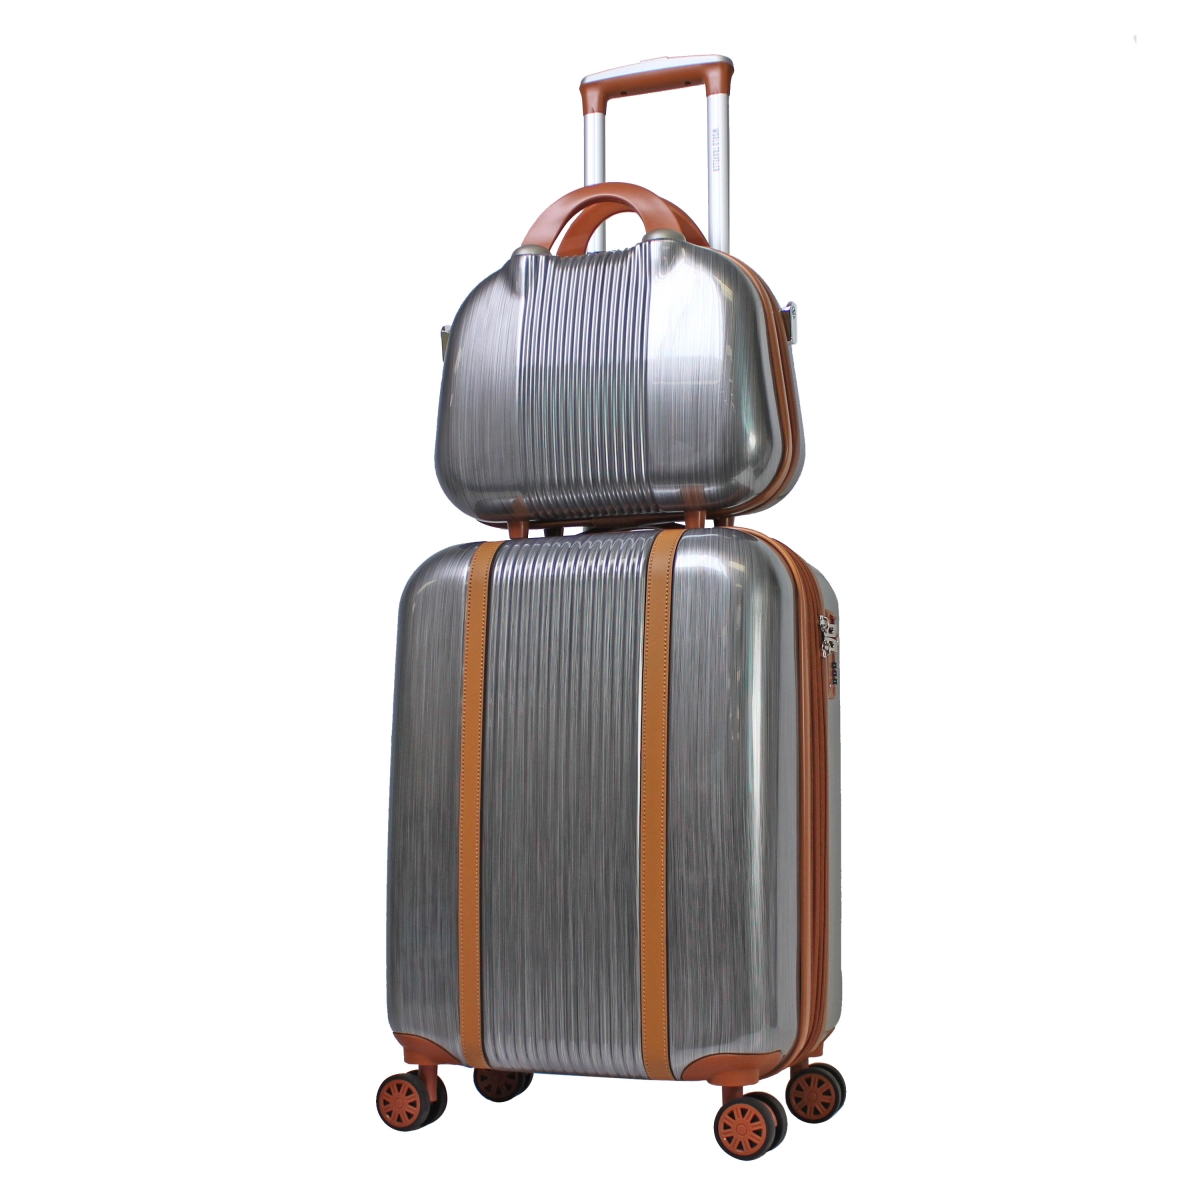 Wt8277-2-silver 2 Piece Classique Lightweight Spinner Luggage Set - Silver